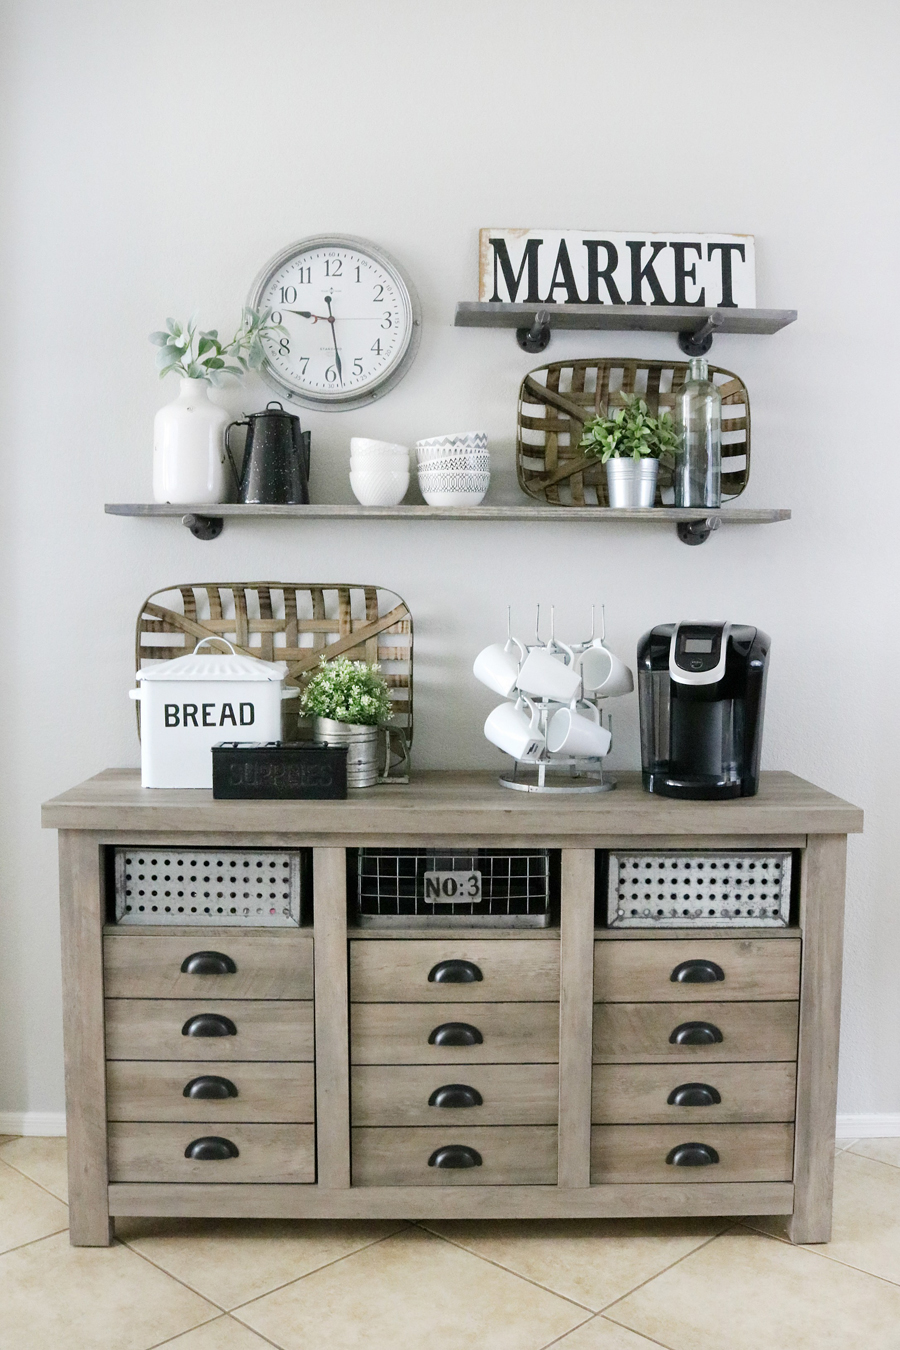 Modern Farmhouse Inspired Coffee Bar Station - The Crafted Sparrow